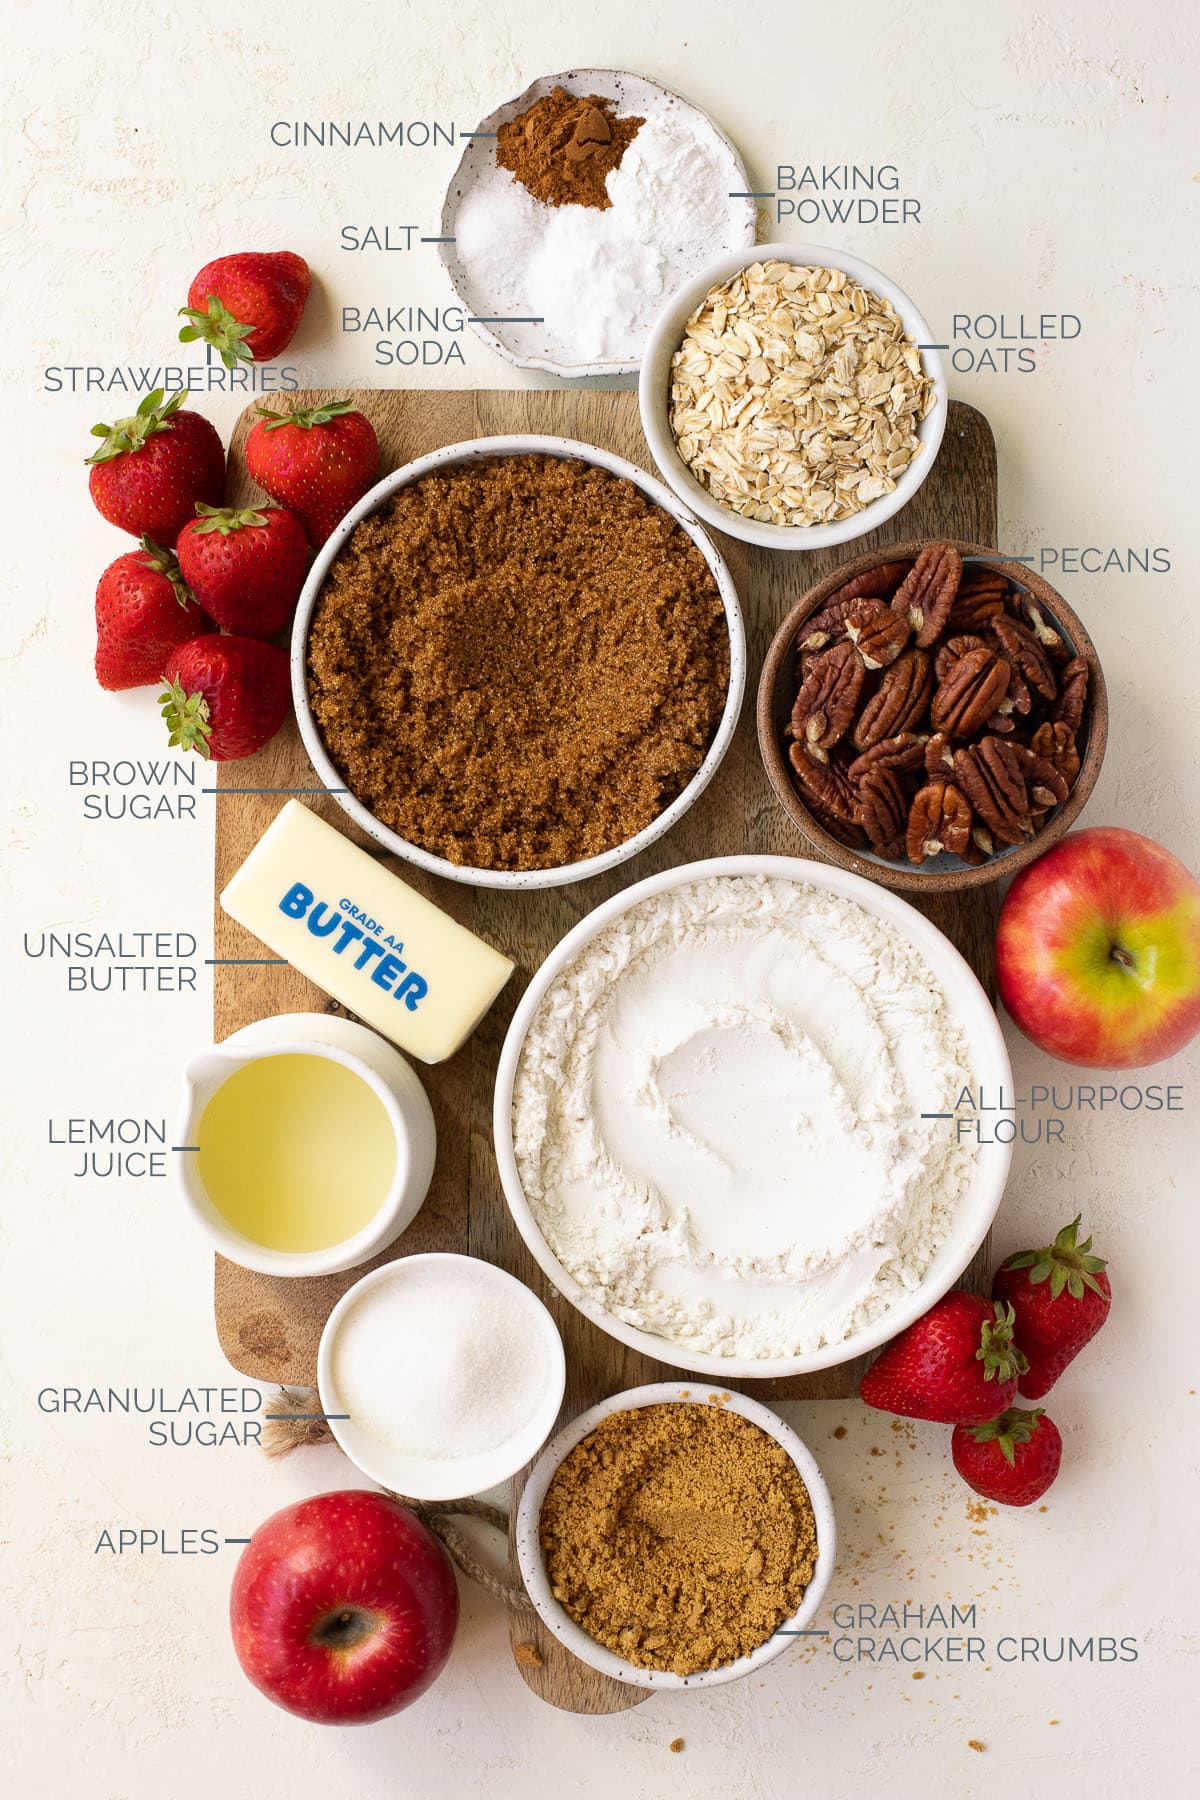 Labeled ingredients needed to make a strawberry and apple crumble.